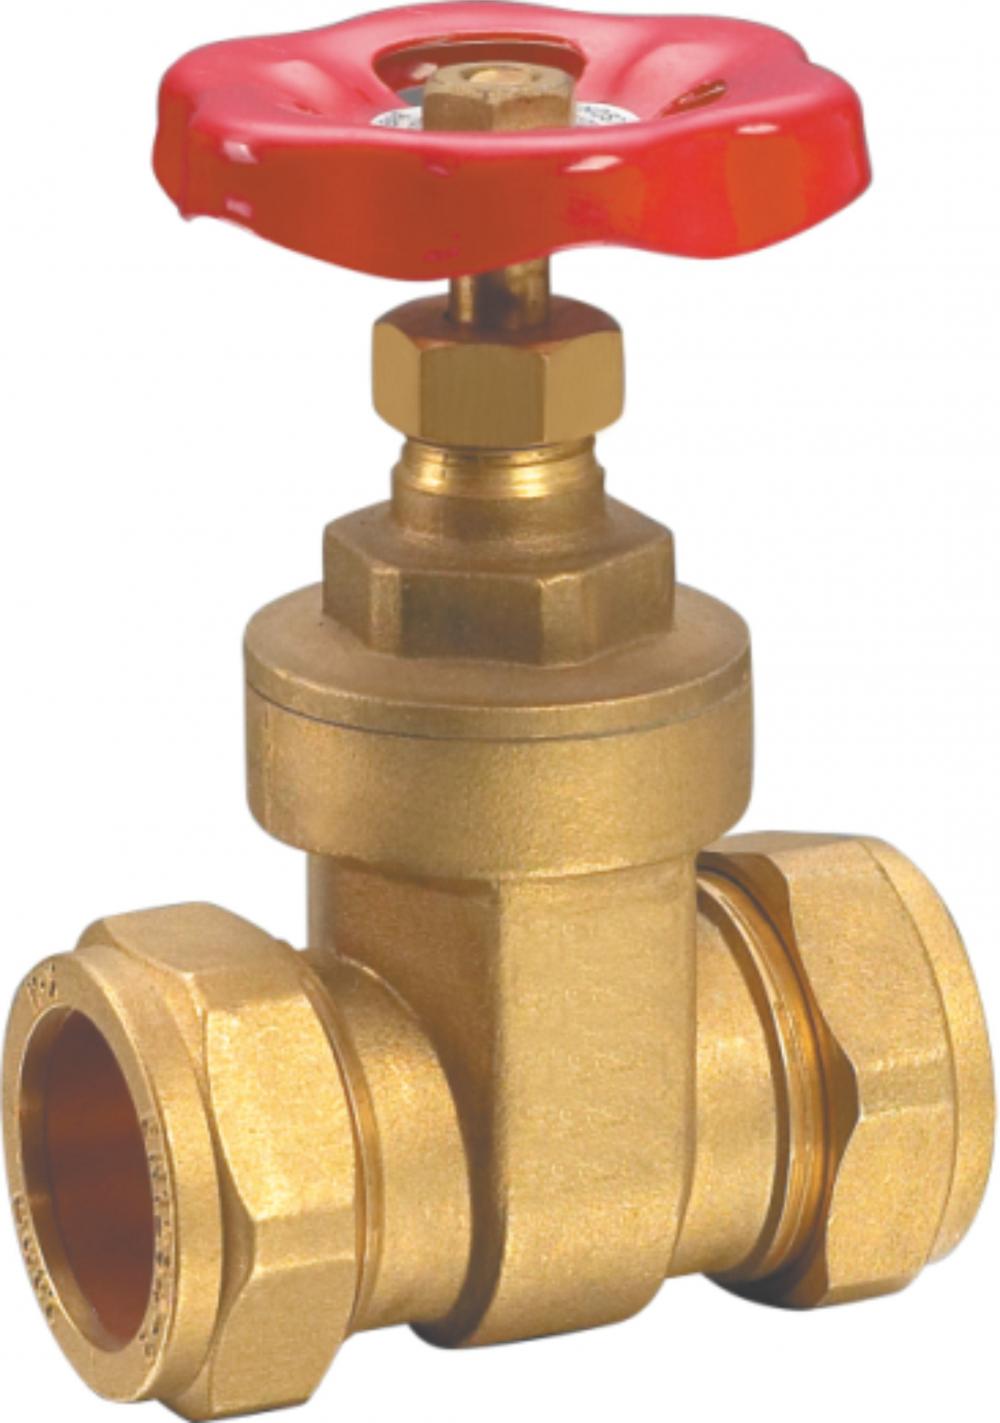 Plumbing Supplier For Brass Ball Valve Gate Valve With Compression Nuts